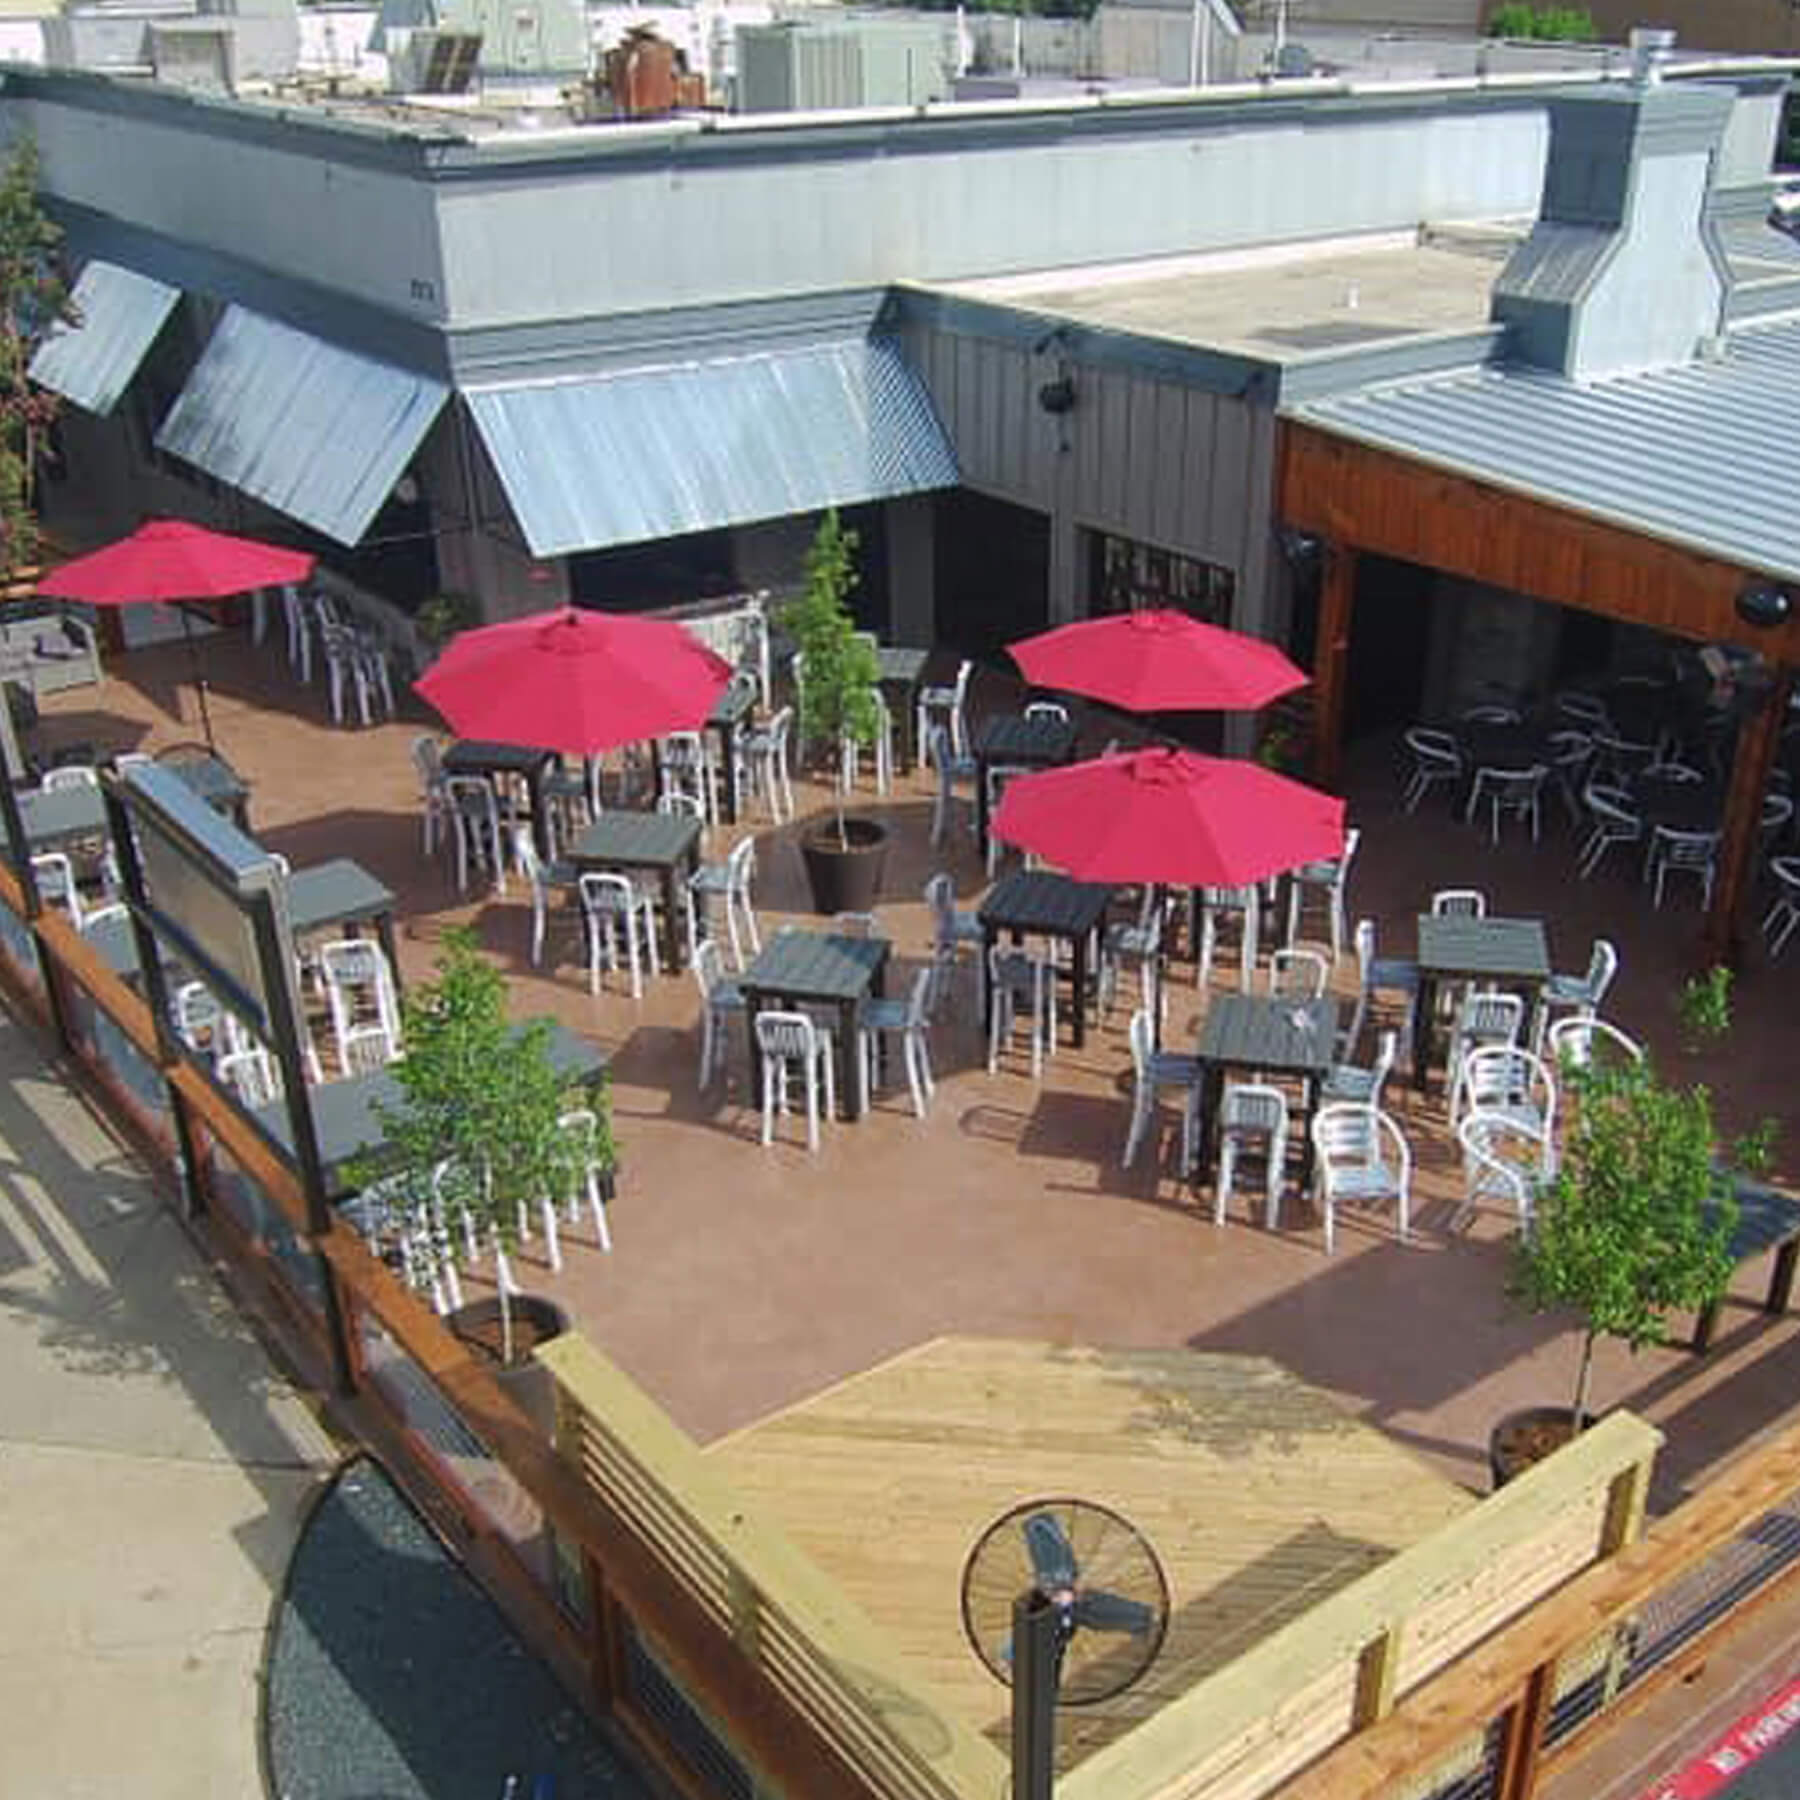 A patio with tables and chairs, umbrellas and trees.